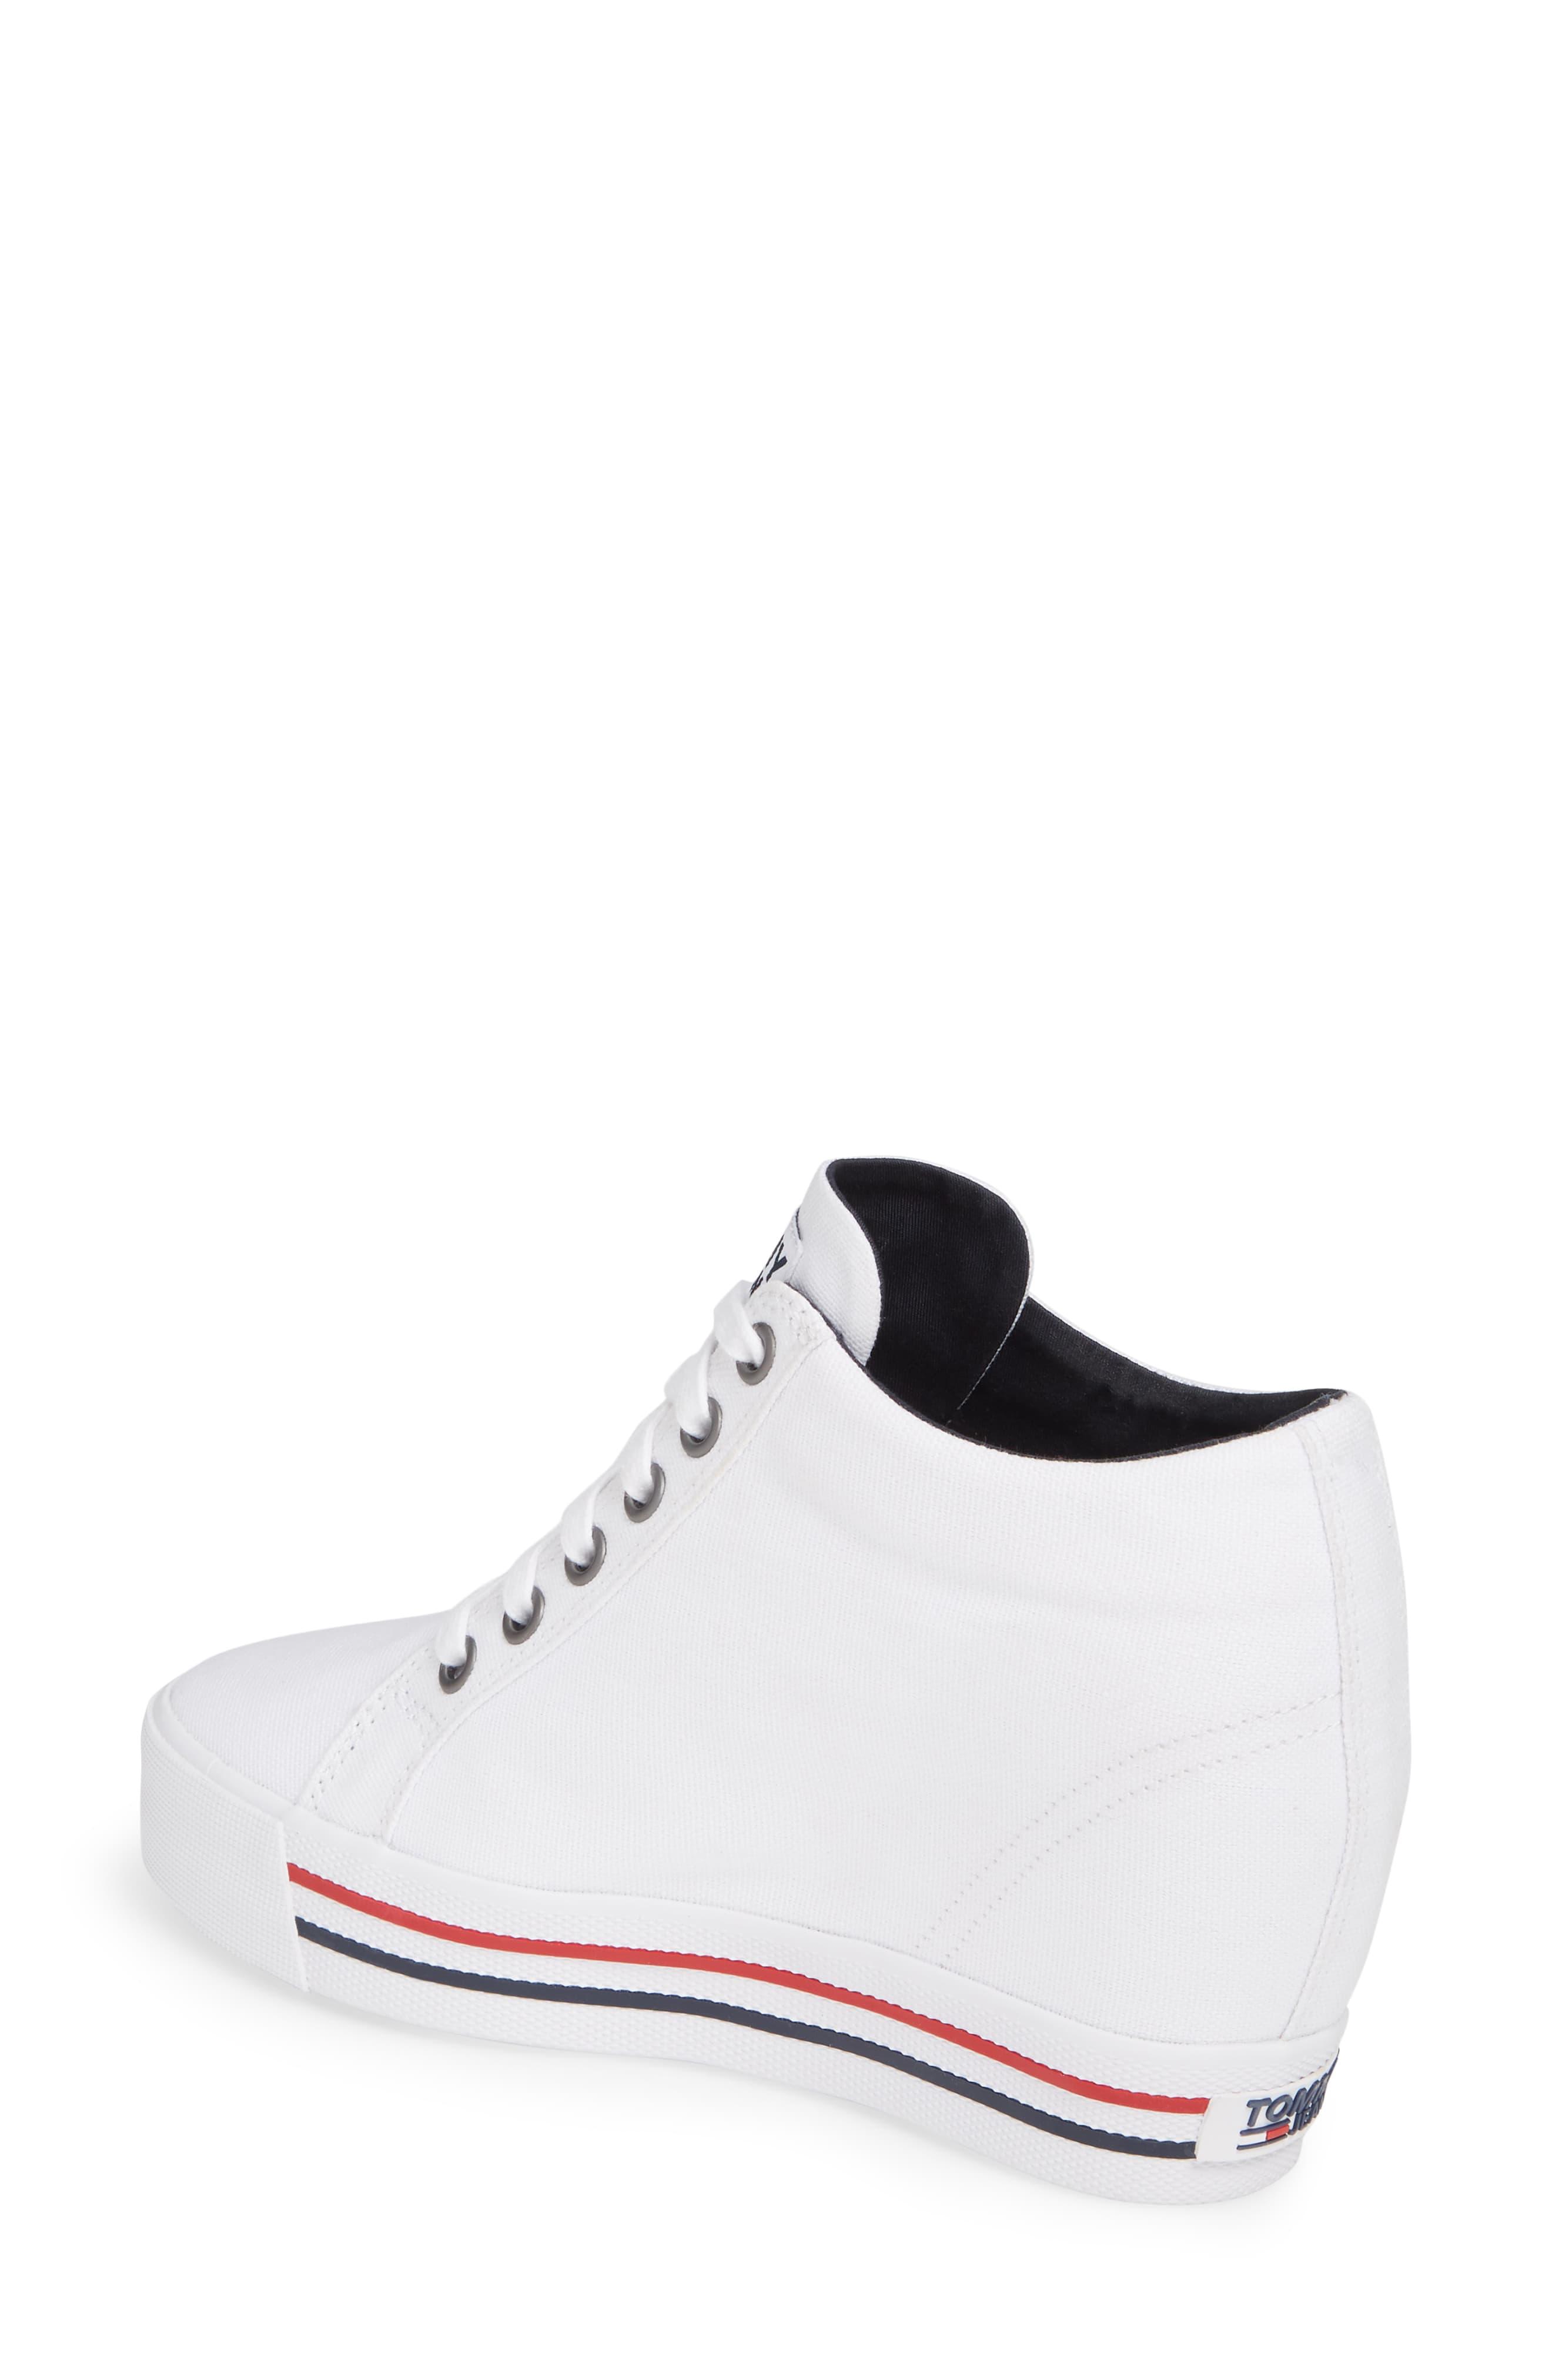 Tommy Hilfiger Wedge Sneakers White Ireland, SAVE 41% - aveclumiere.com